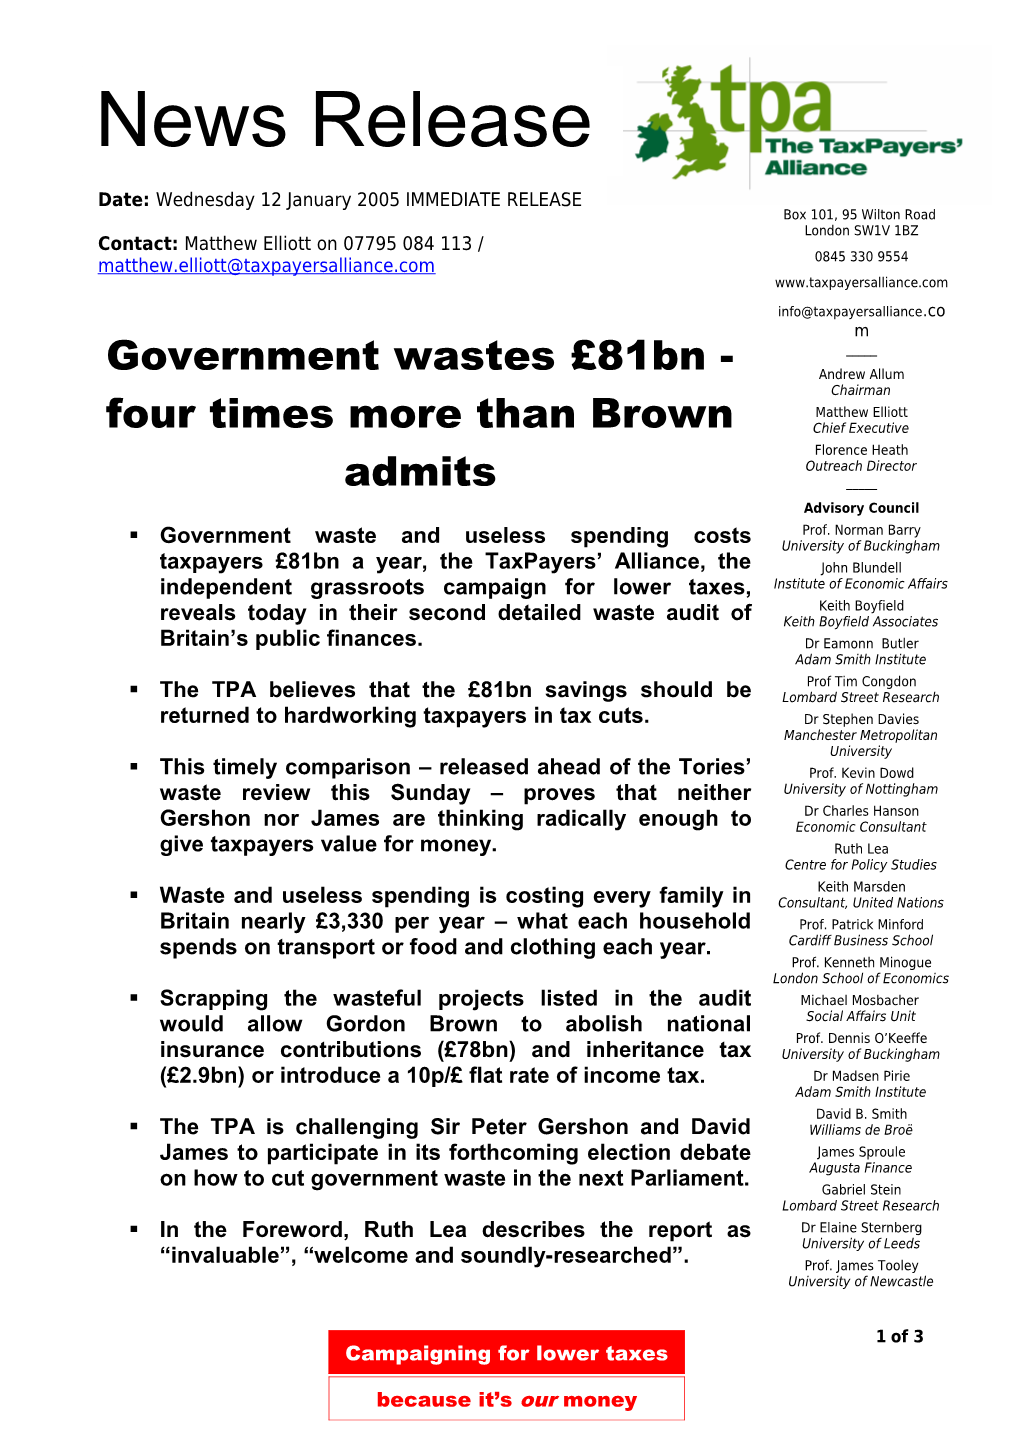 The TPA Believes That the 81Bn Savings Should Be Returned to Hardworking Taxpayers In